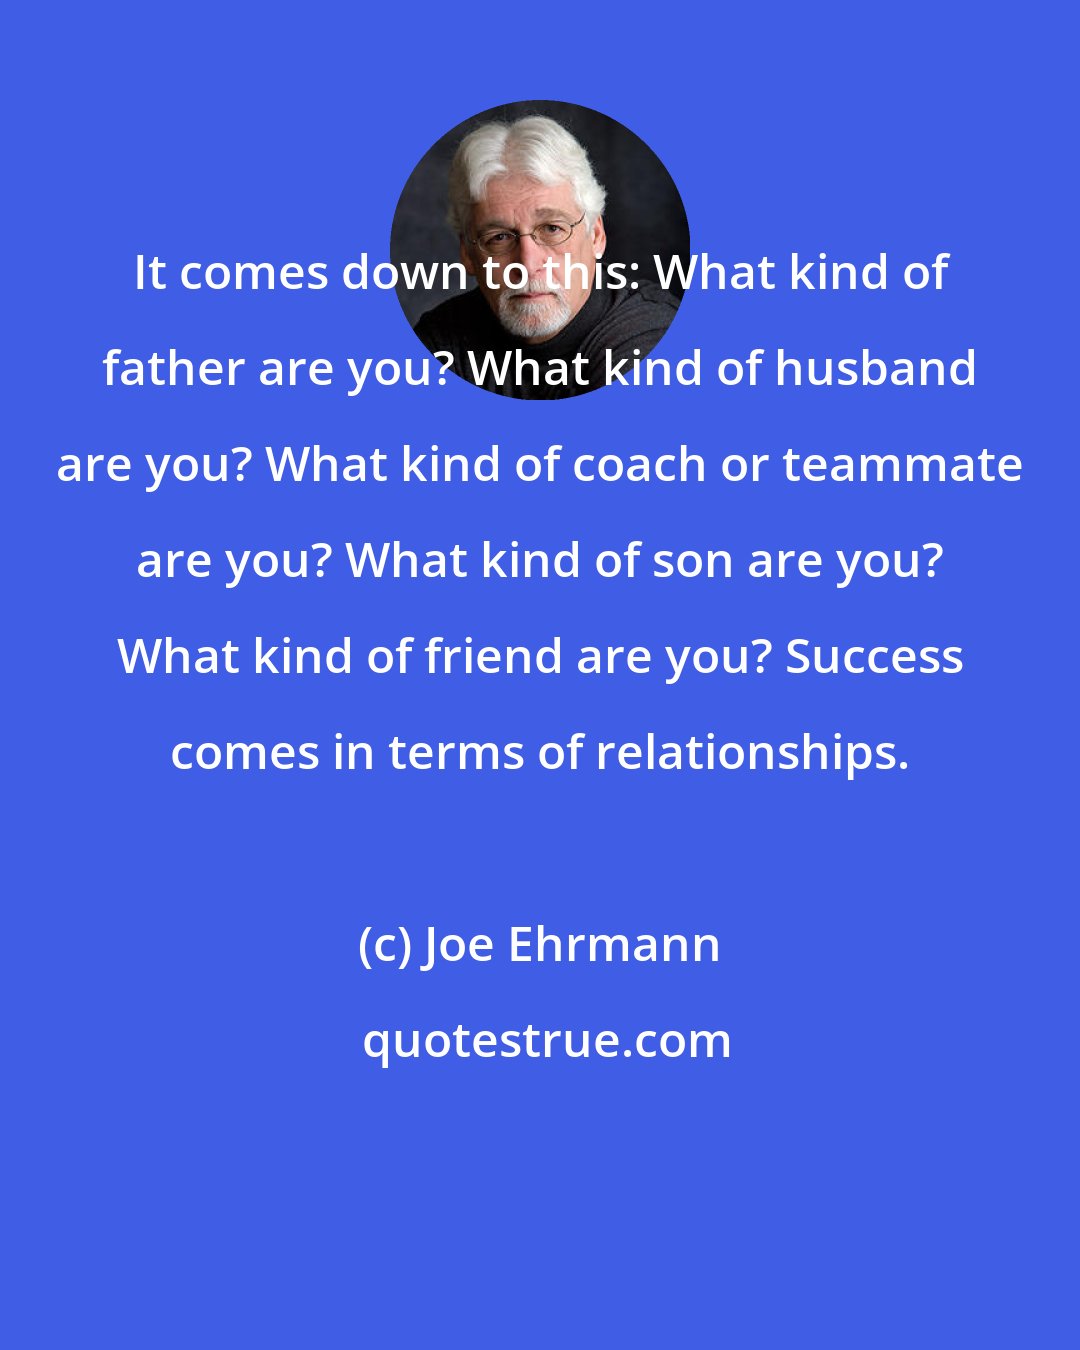 Joe Ehrmann: It comes down to this: What kind of father are you? What kind of husband are you? What kind of coach or teammate are you? What kind of son are you? What kind of friend are you? Success comes in terms of relationships.